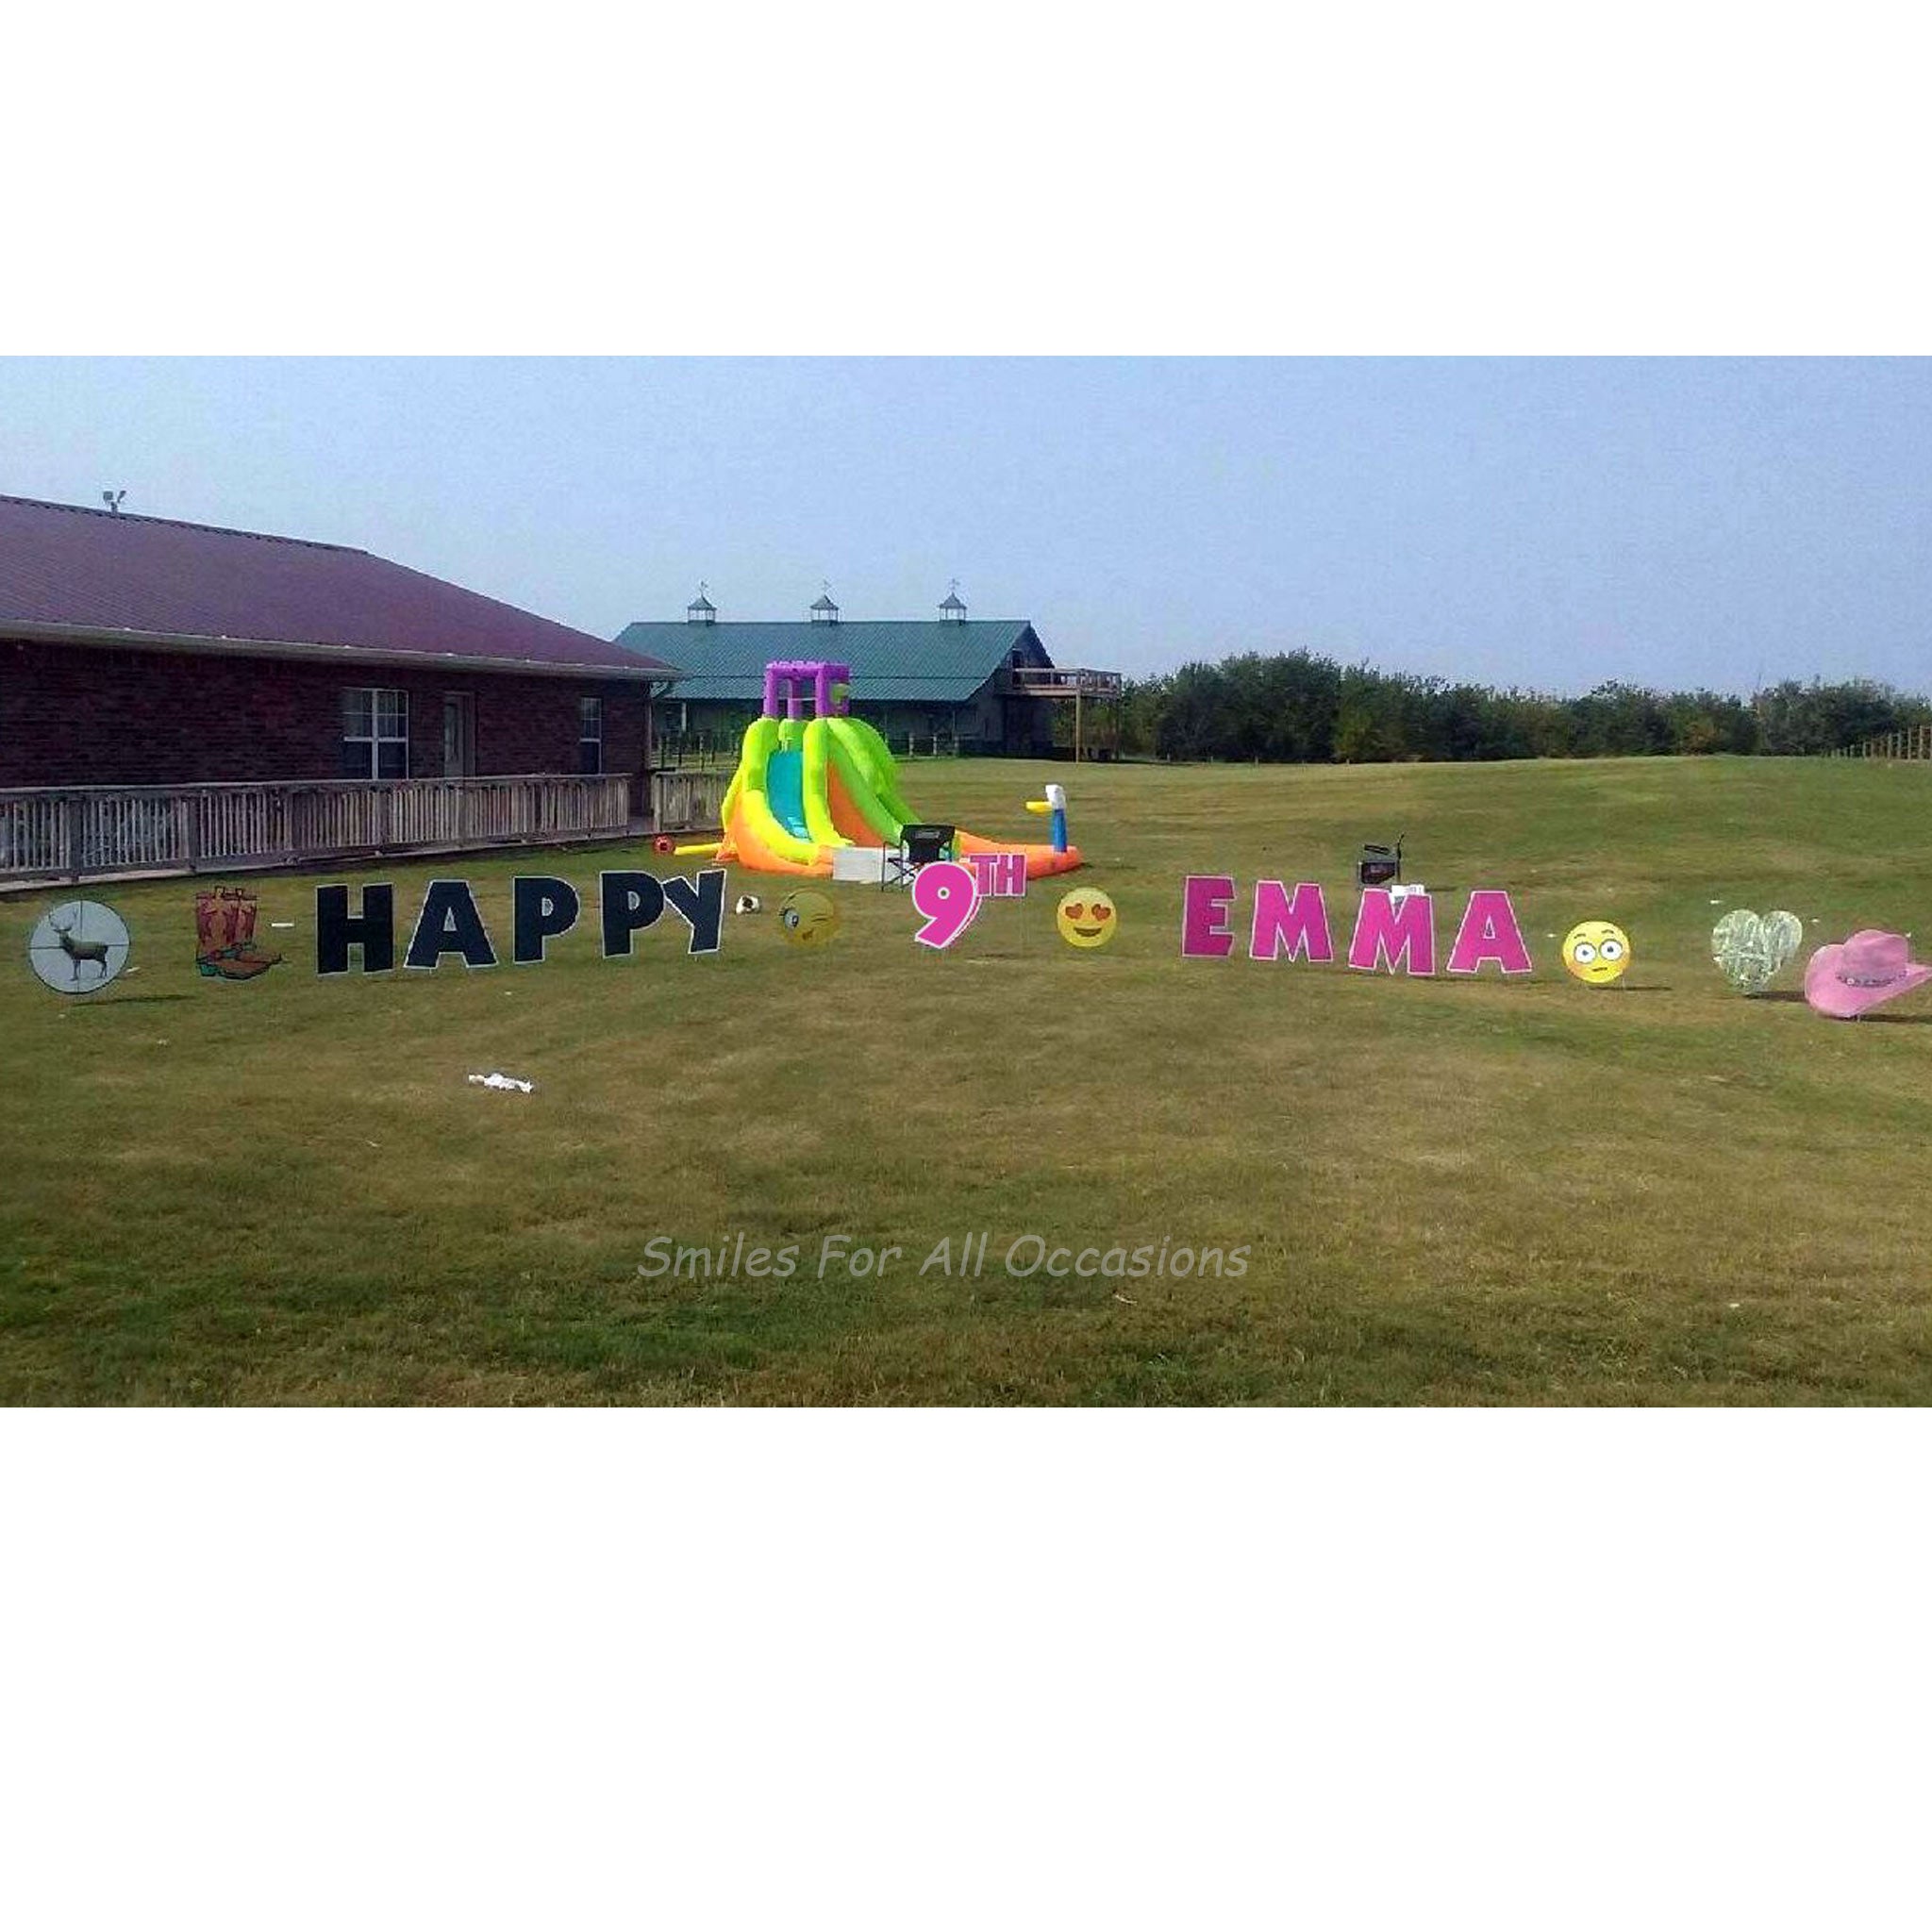 Women Underwear Birthday Yard Signs – Smiles For All Occasions